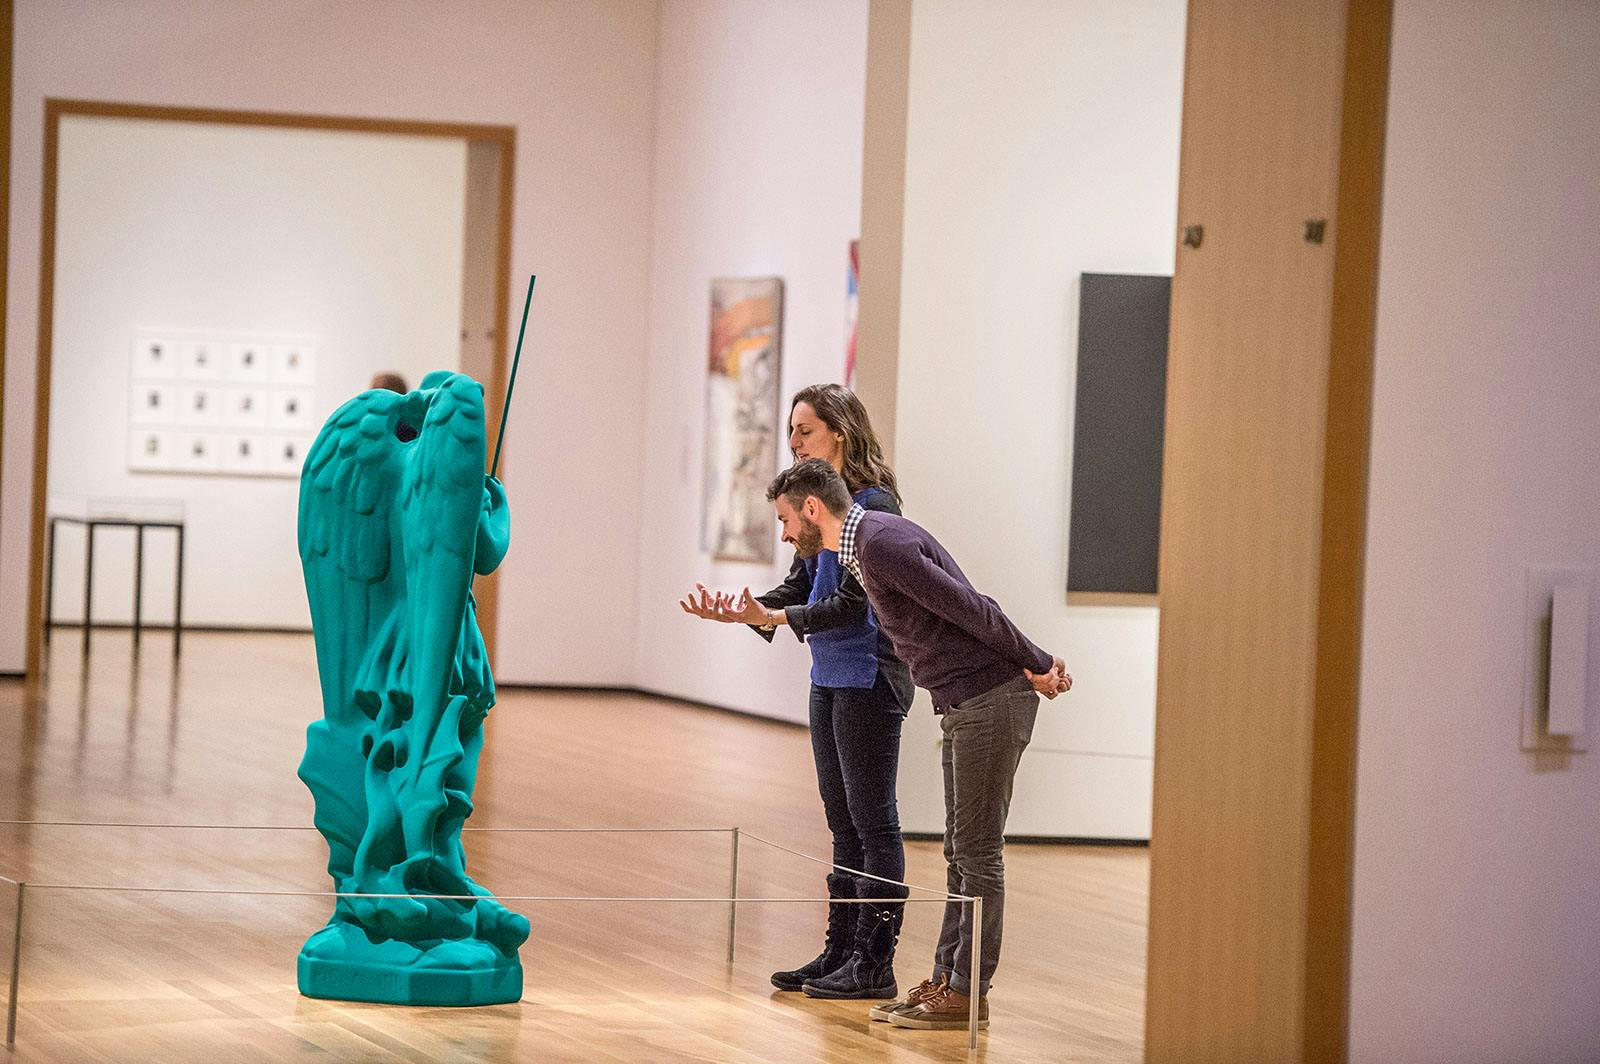 visitors looking at a green sculpture in galleries